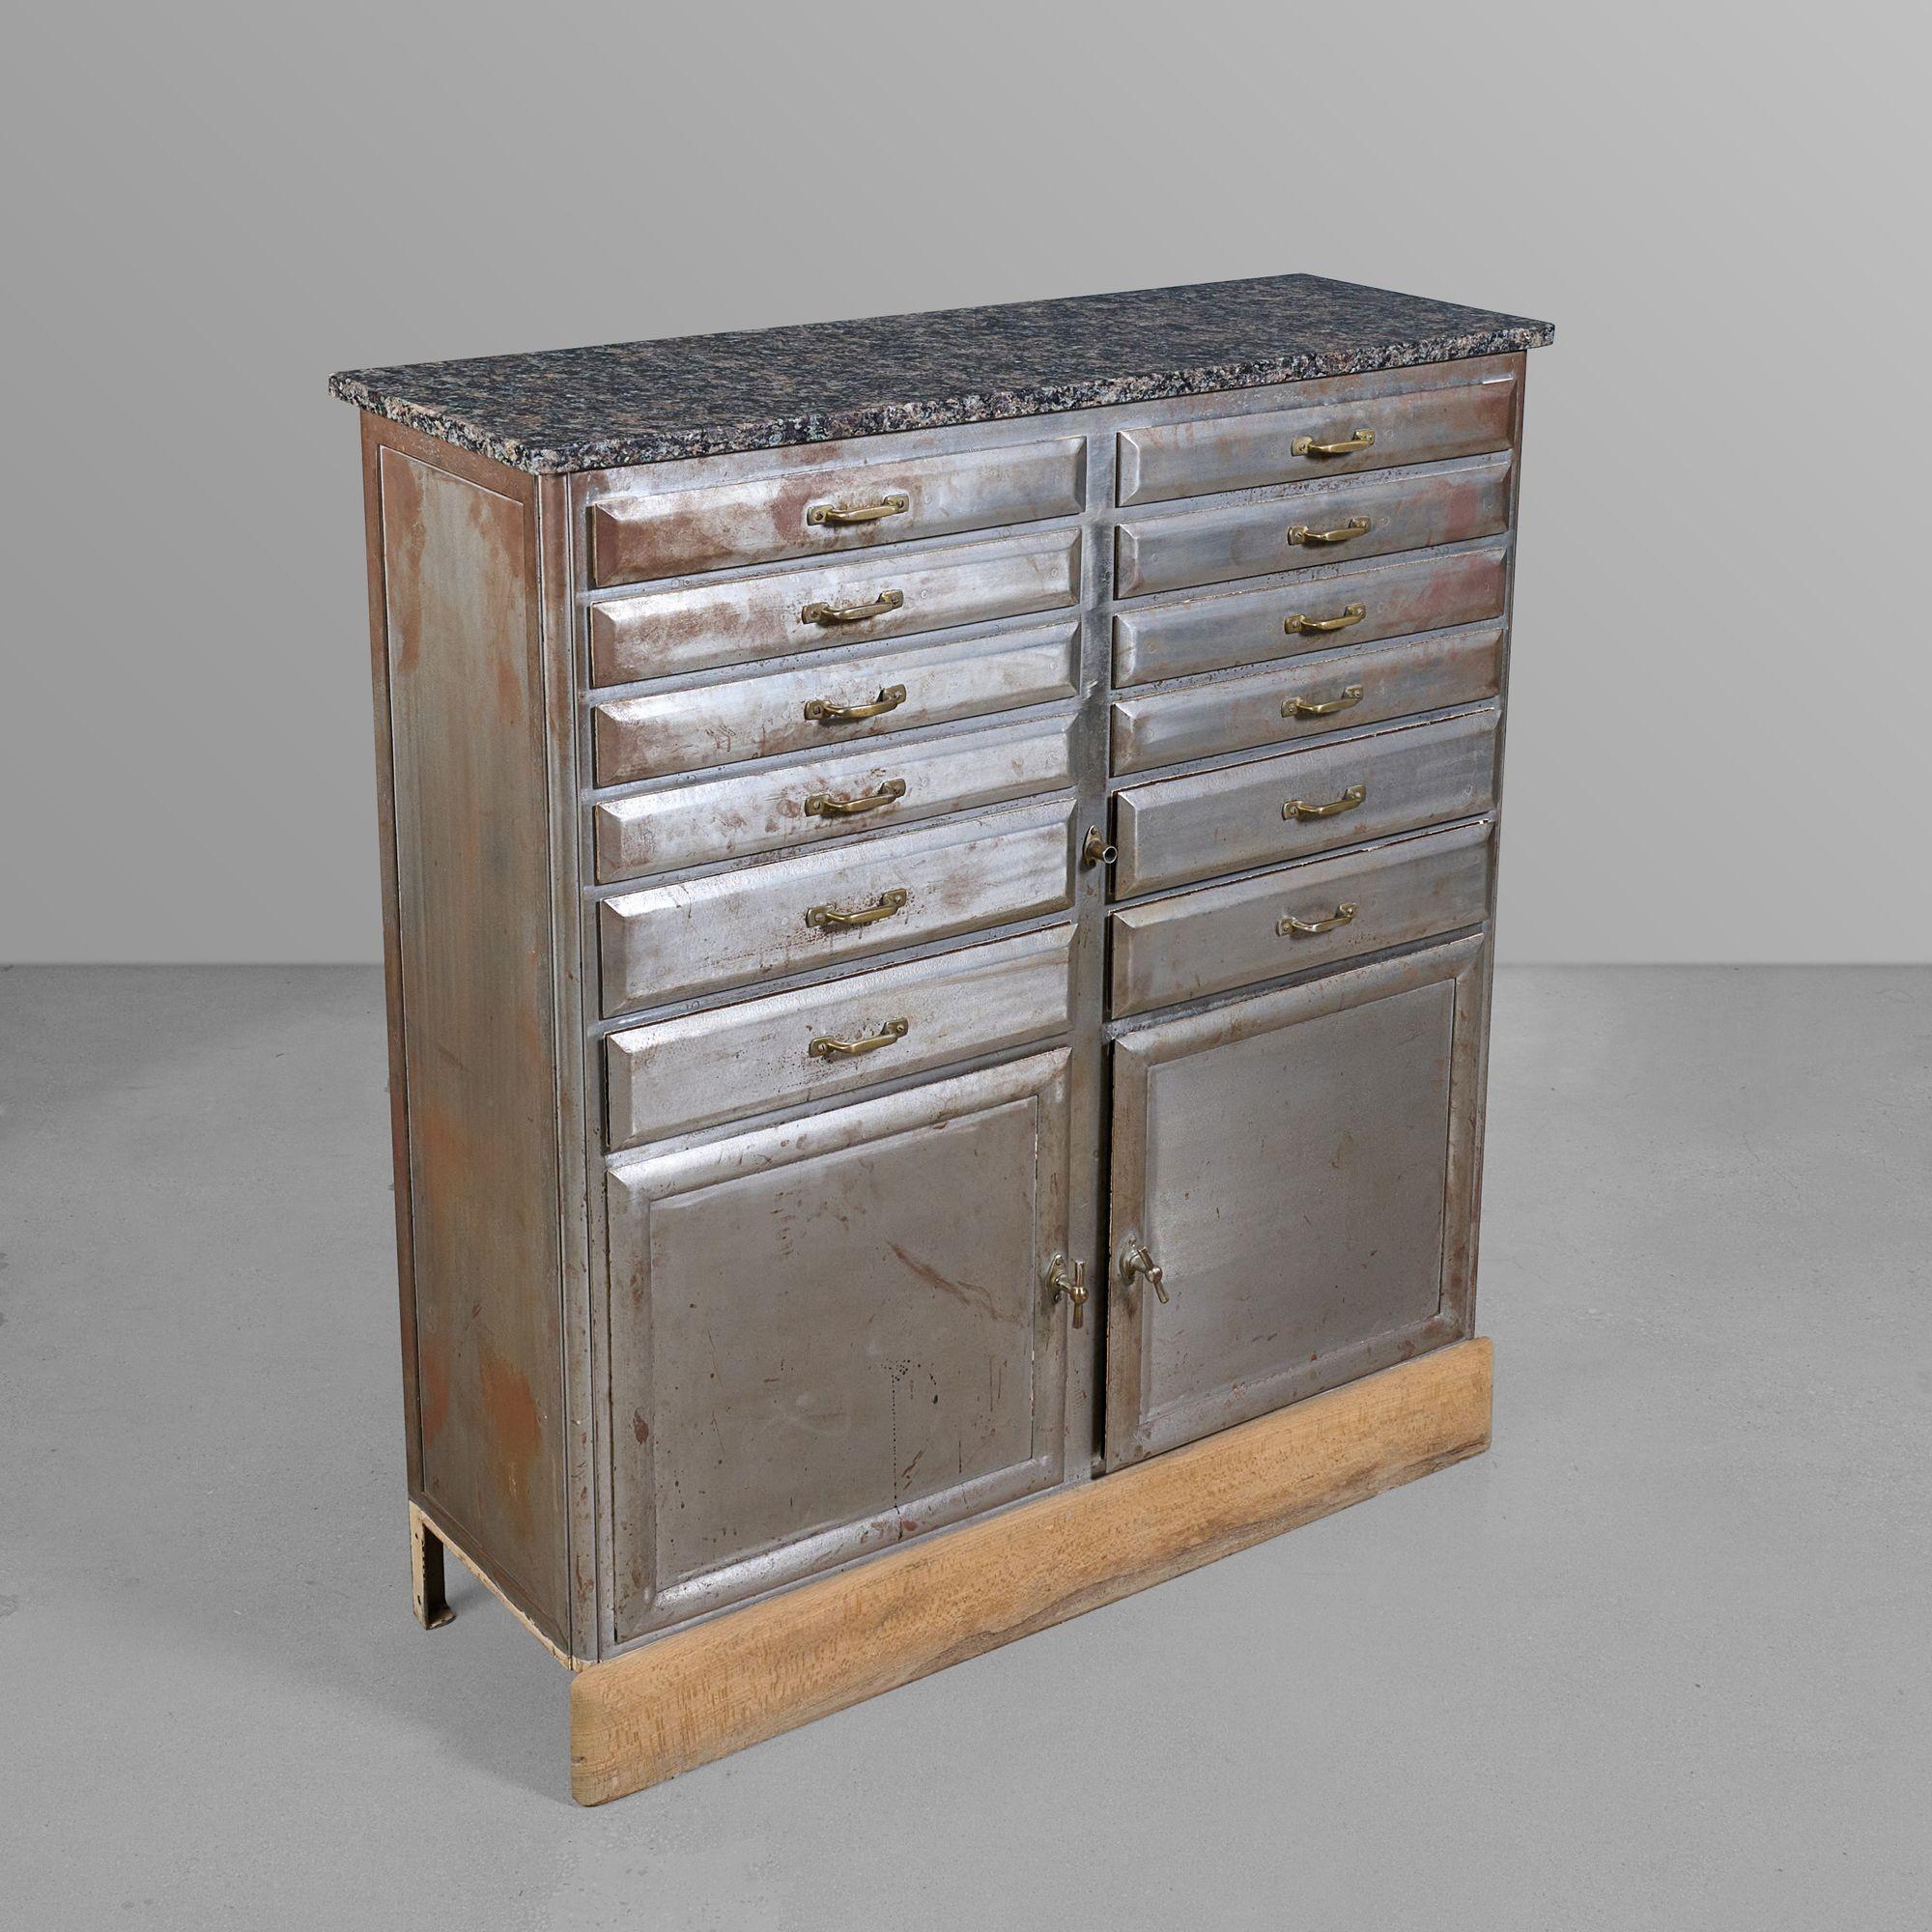 Polished iron, marble, wood, brass medical cabinet.